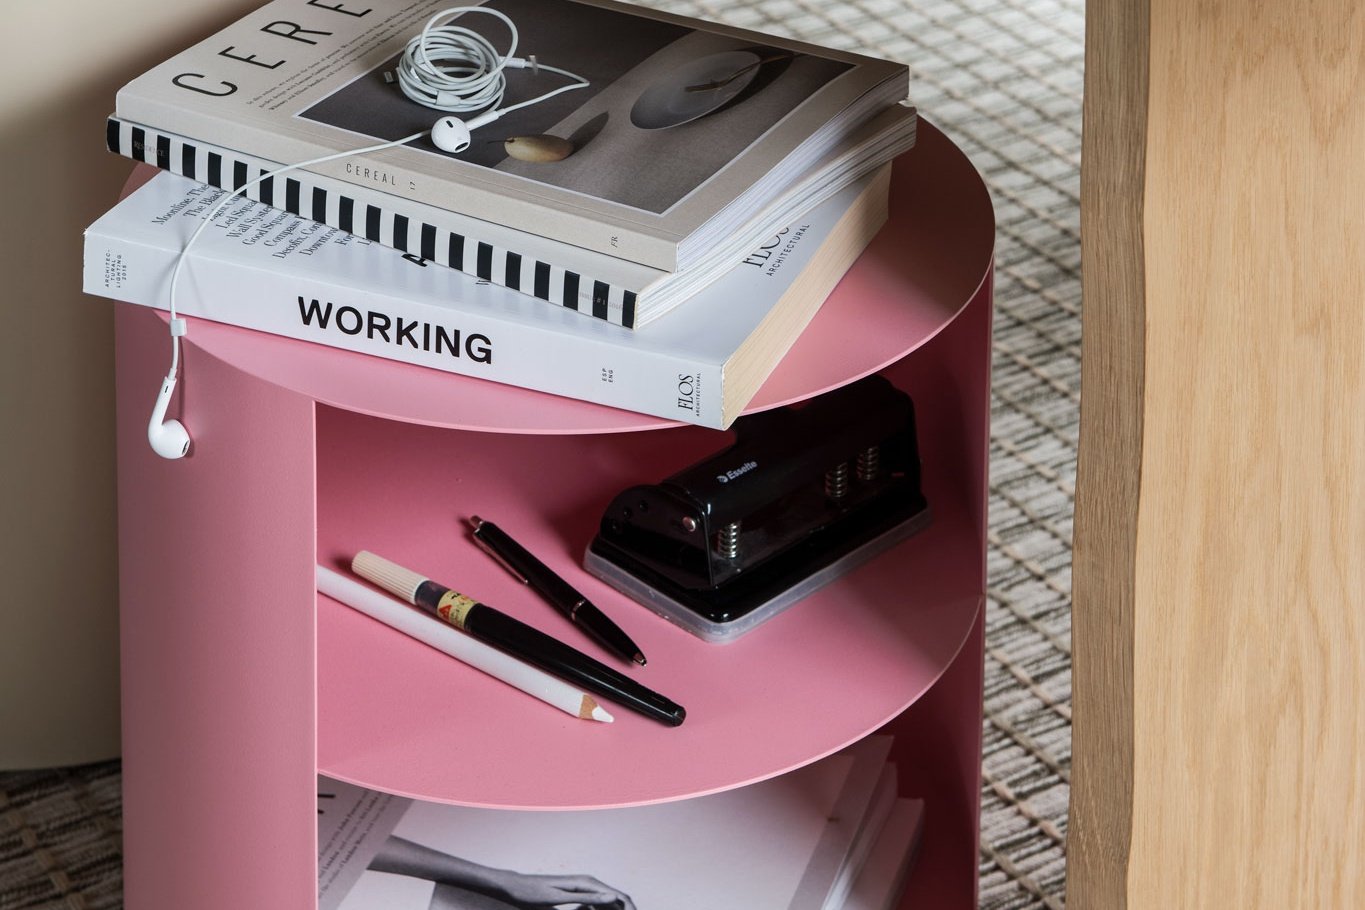 A Hide Side Table in the shade Light Pink being used as storage for books, pens and more on top of a Seaweed Rope Rug